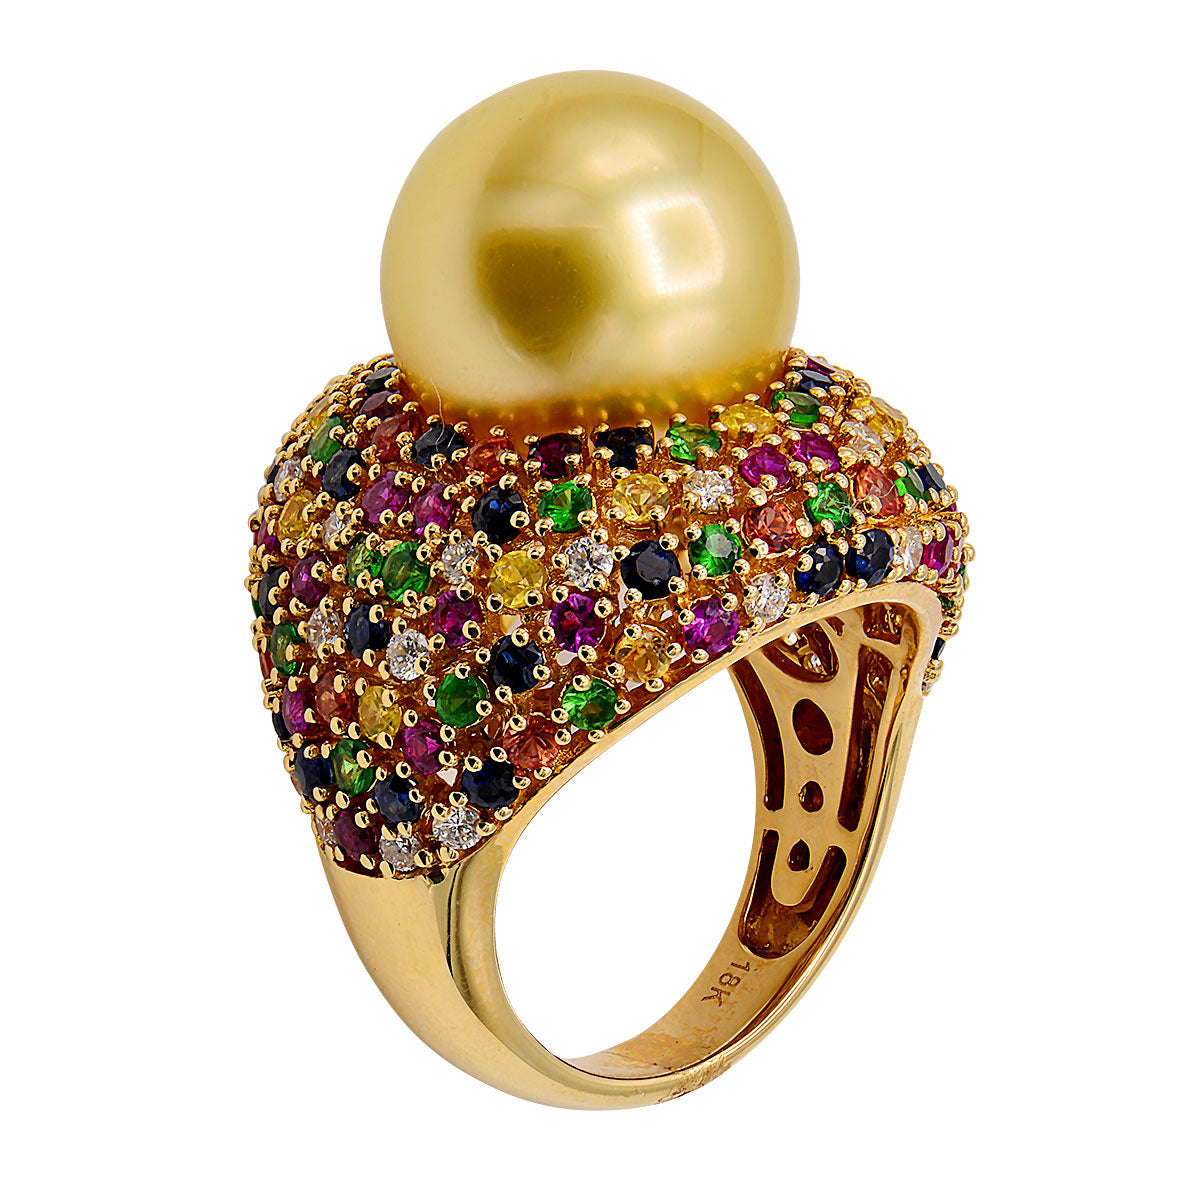 18KY Golden South Sea Pearl Ring, 13-14mm